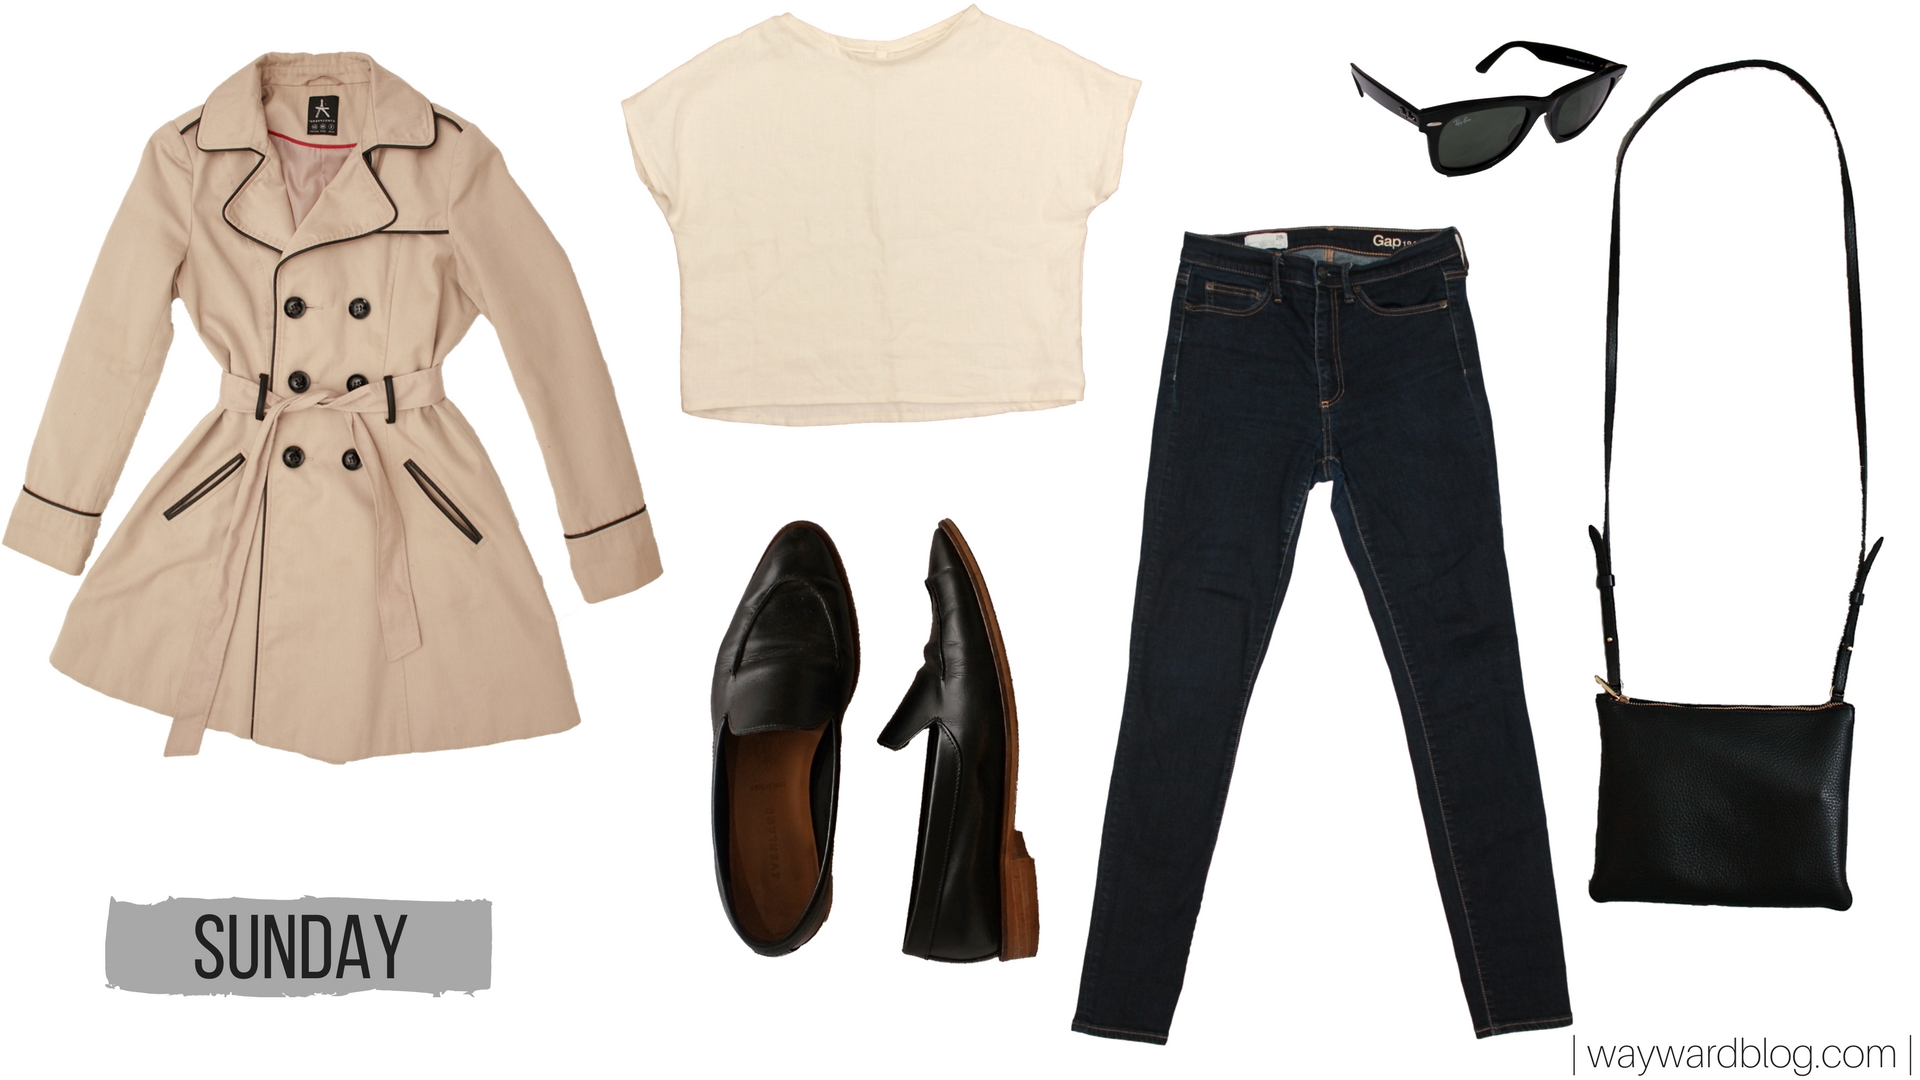 An outfit collage with a white top, blue jeans, and tan trench coat